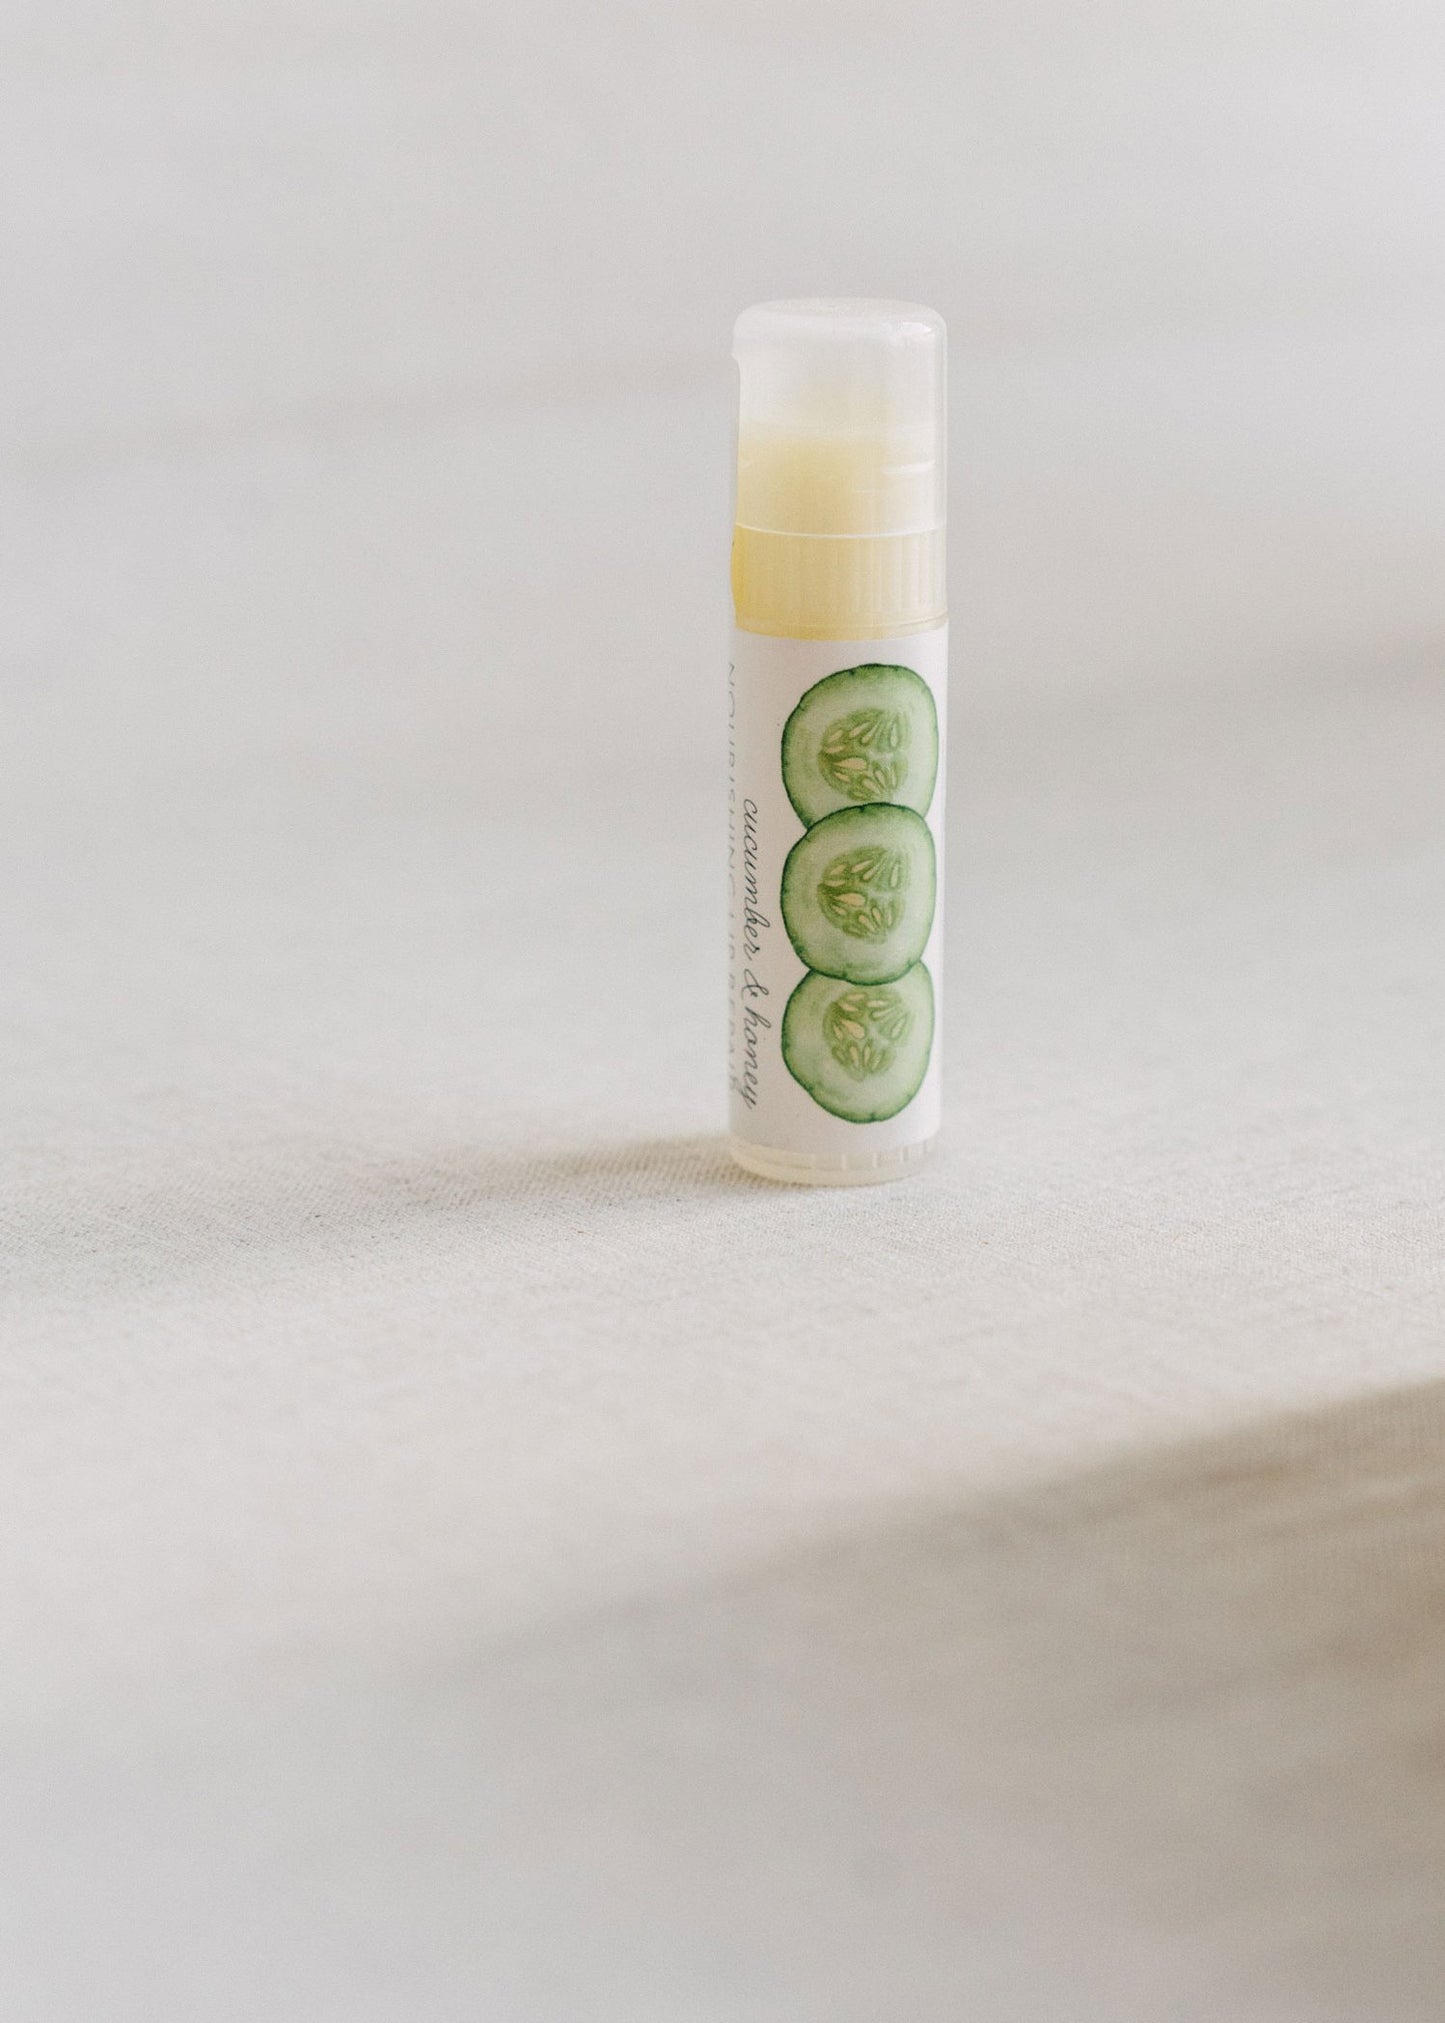 The Cottage Greenhouse Lip Butter